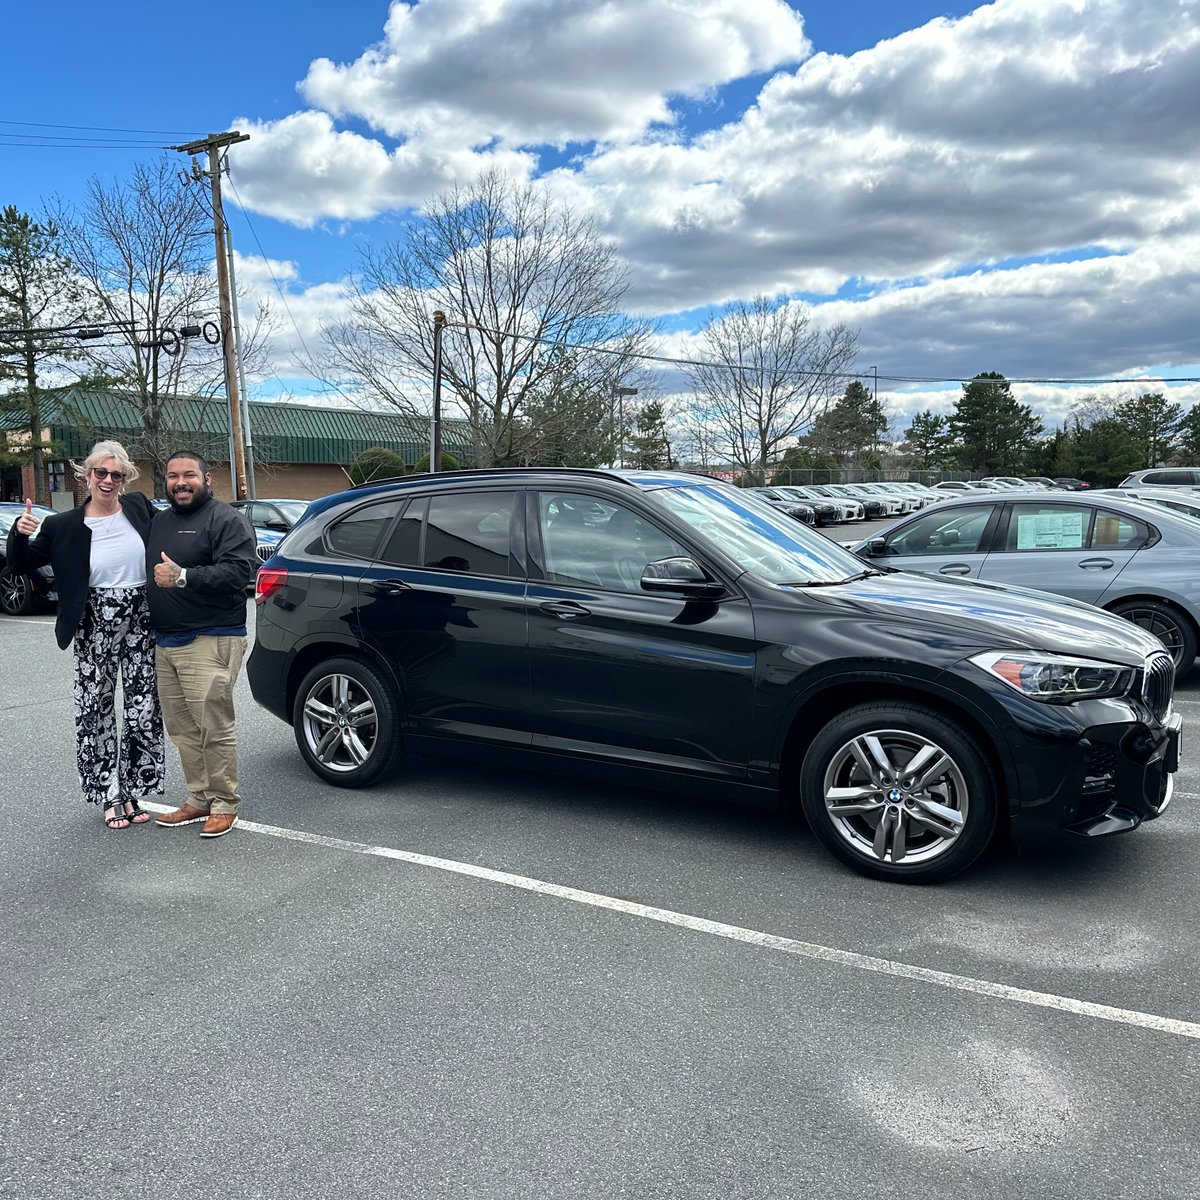 😀 Congratulations to Ms. Sanderson. She purchased this beautiful BMW X1 from David Hernandez. Cheers to another happy customer! #ShopAC #AtlanticCityCars #LuxuryCars